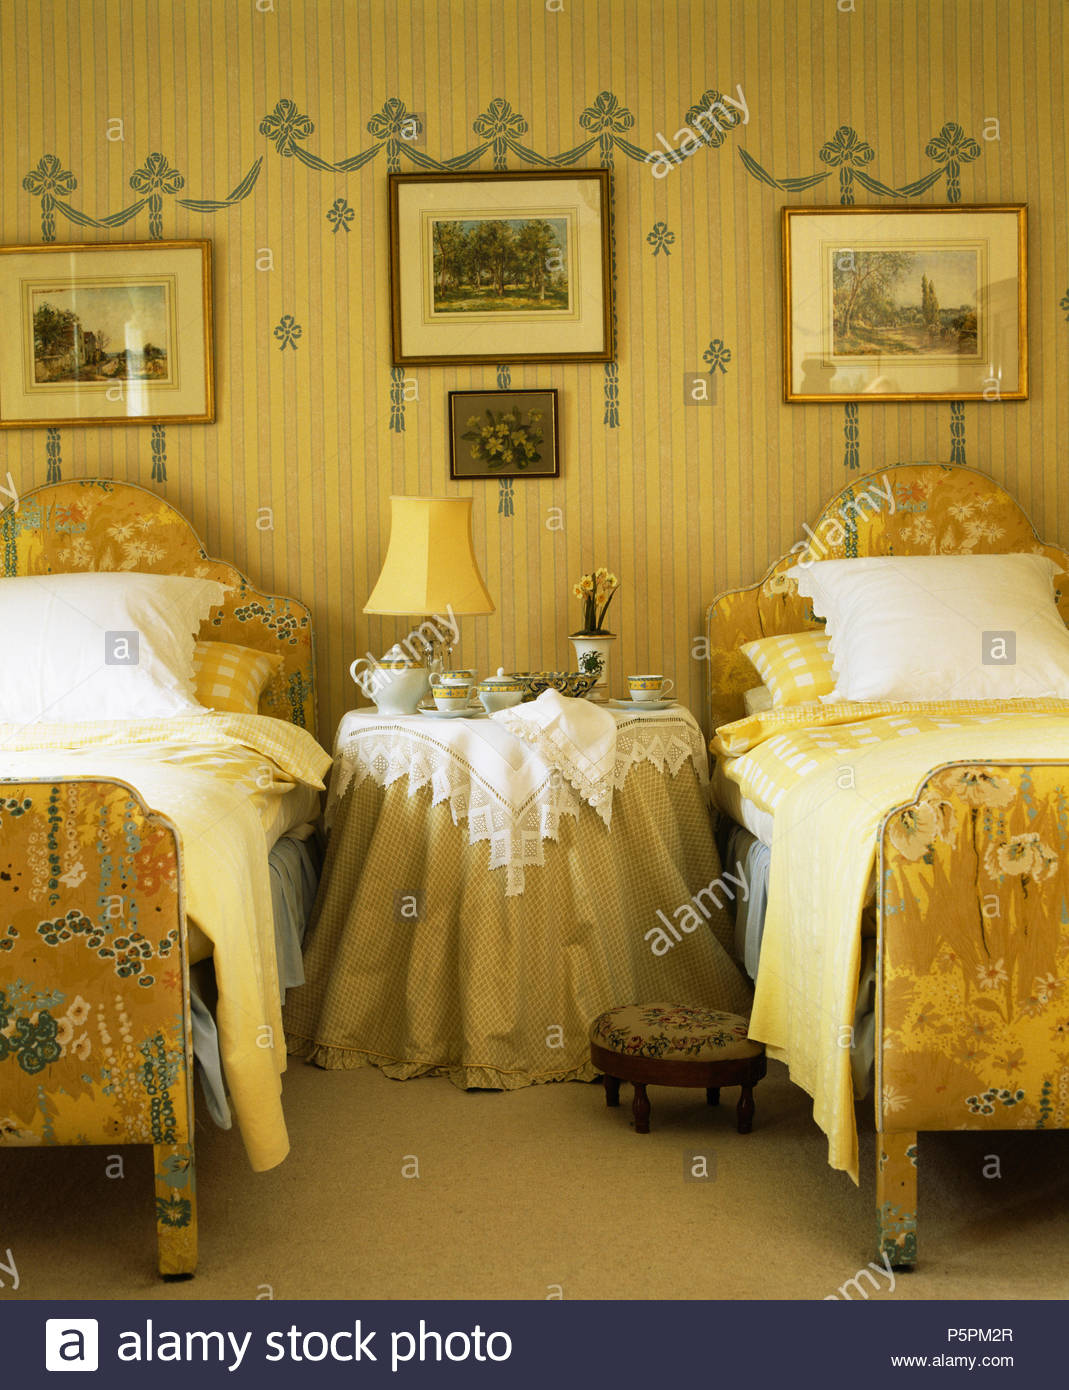 Pictures On Wall Above Upholstered Vintage Twin Beds In French